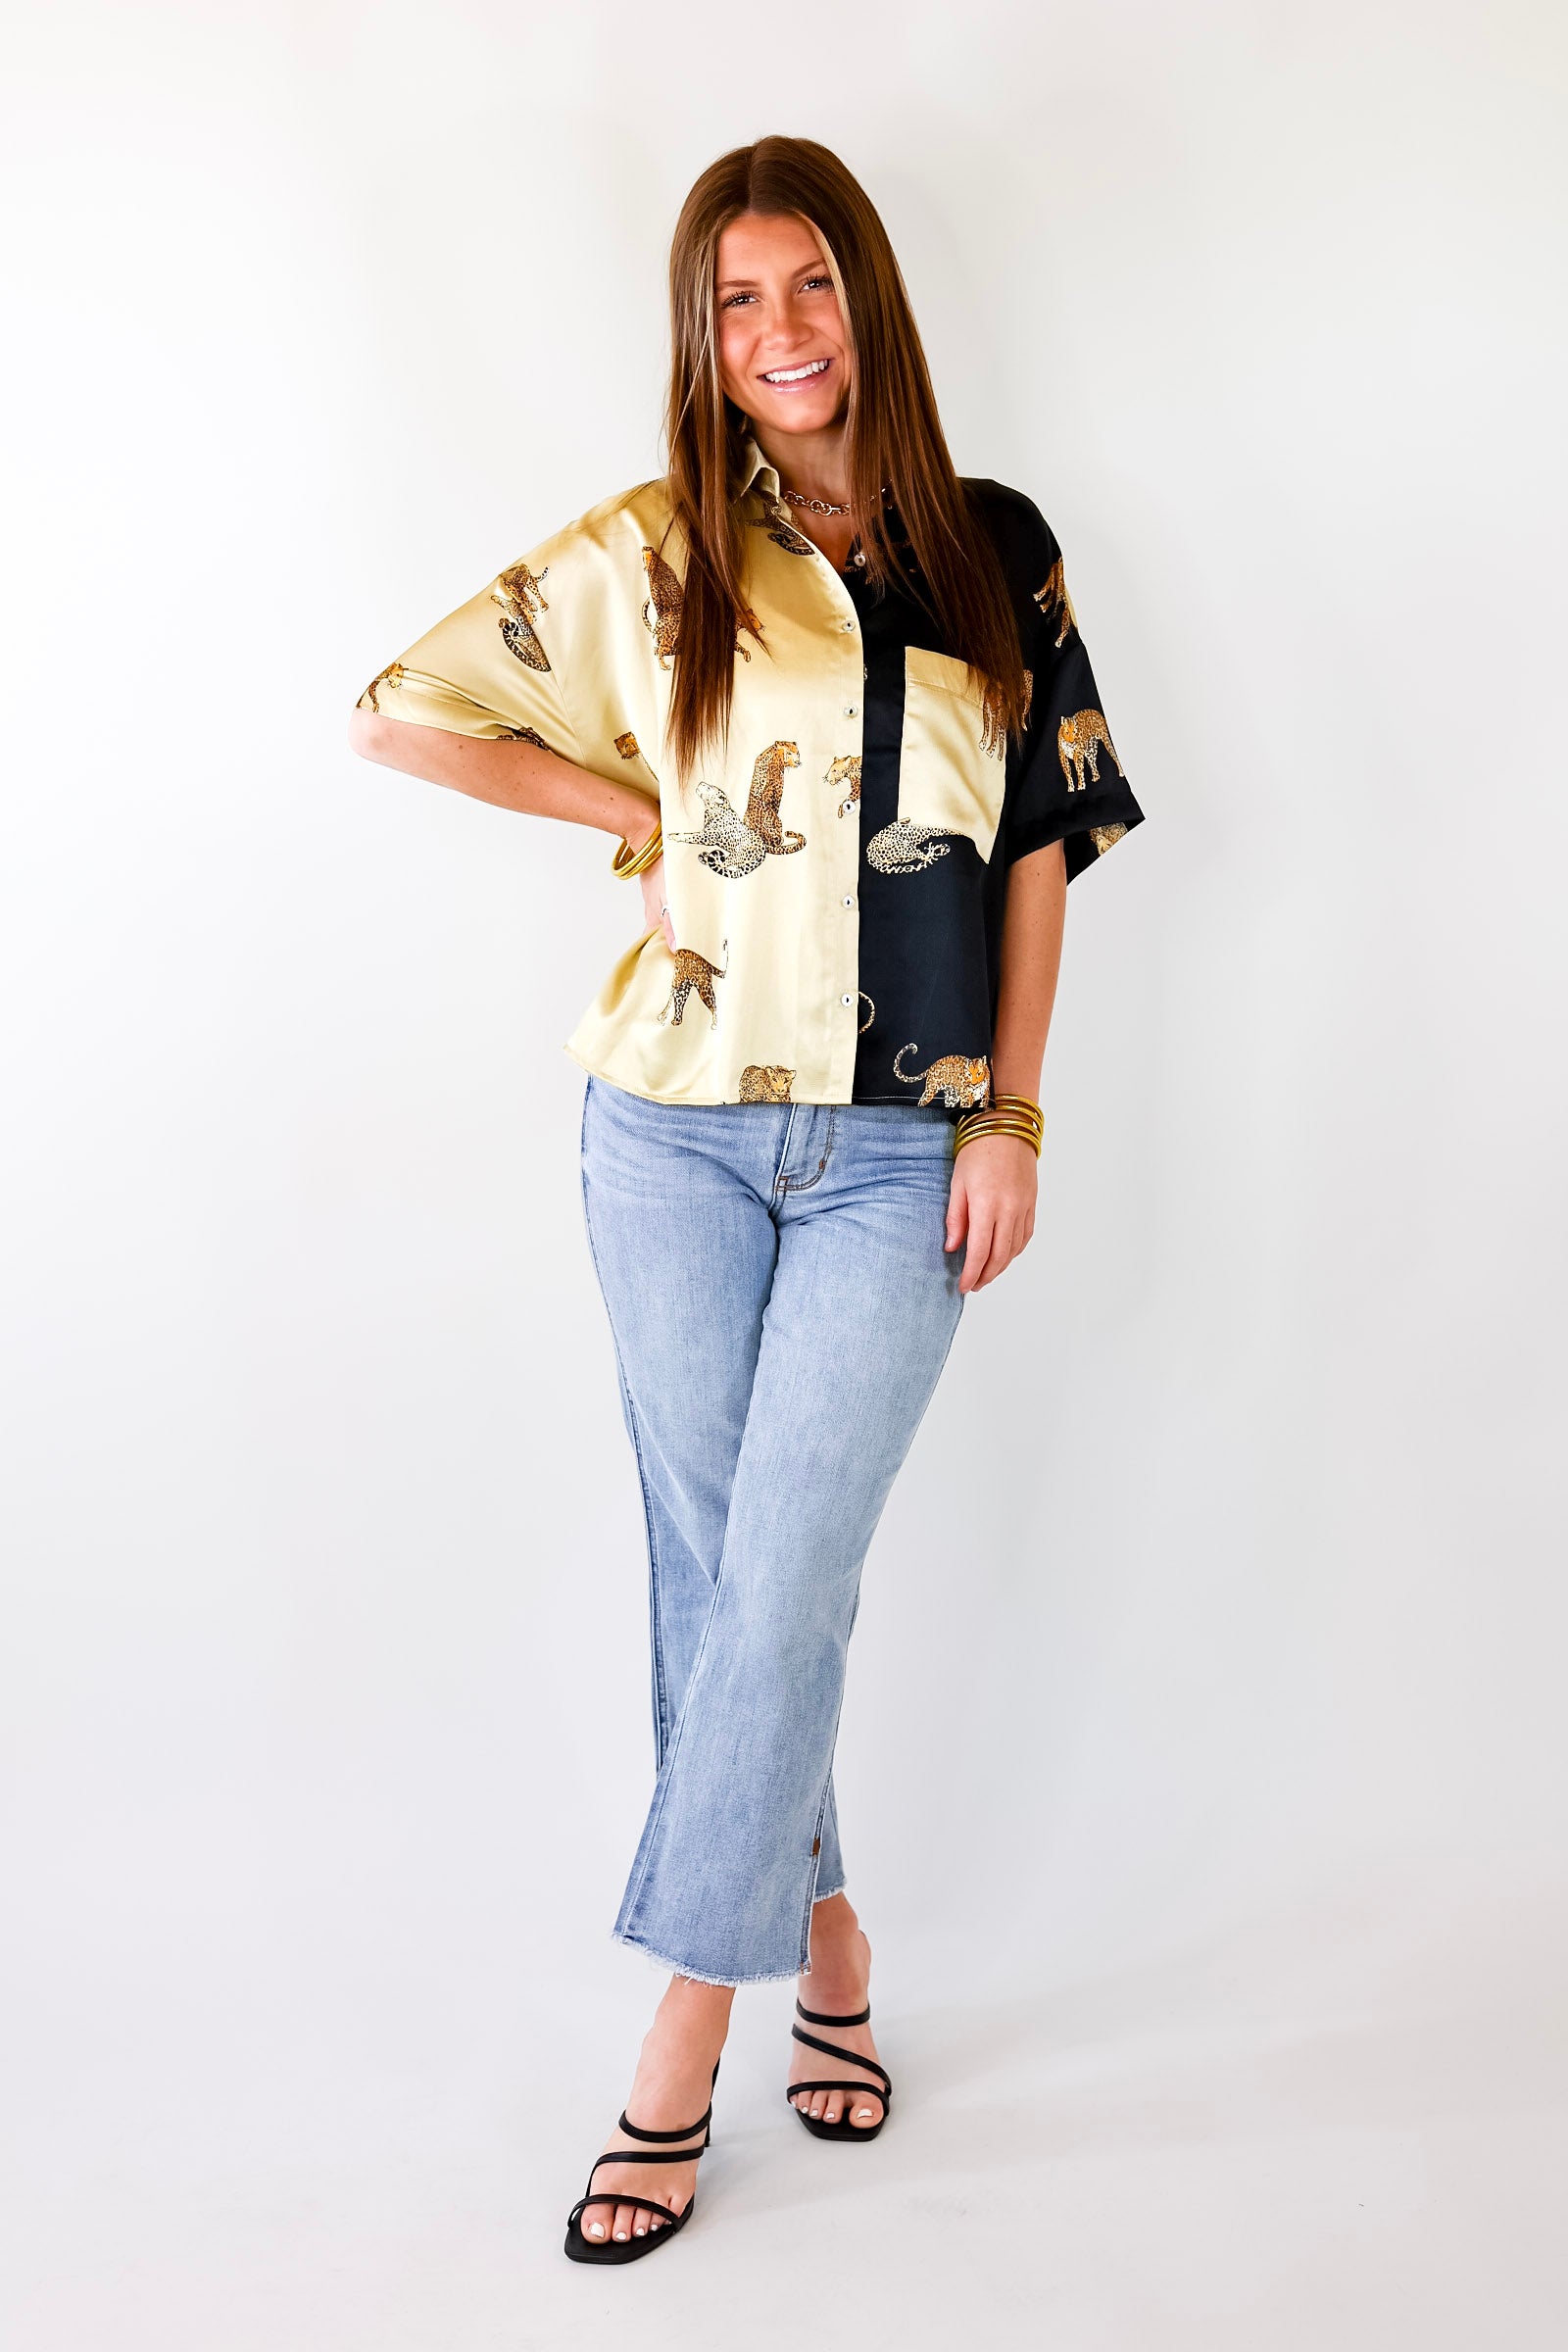 All Eyes On Me Button Up Cheetah Print Blouse in Black and Gold - Giddy Up Glamour Boutique